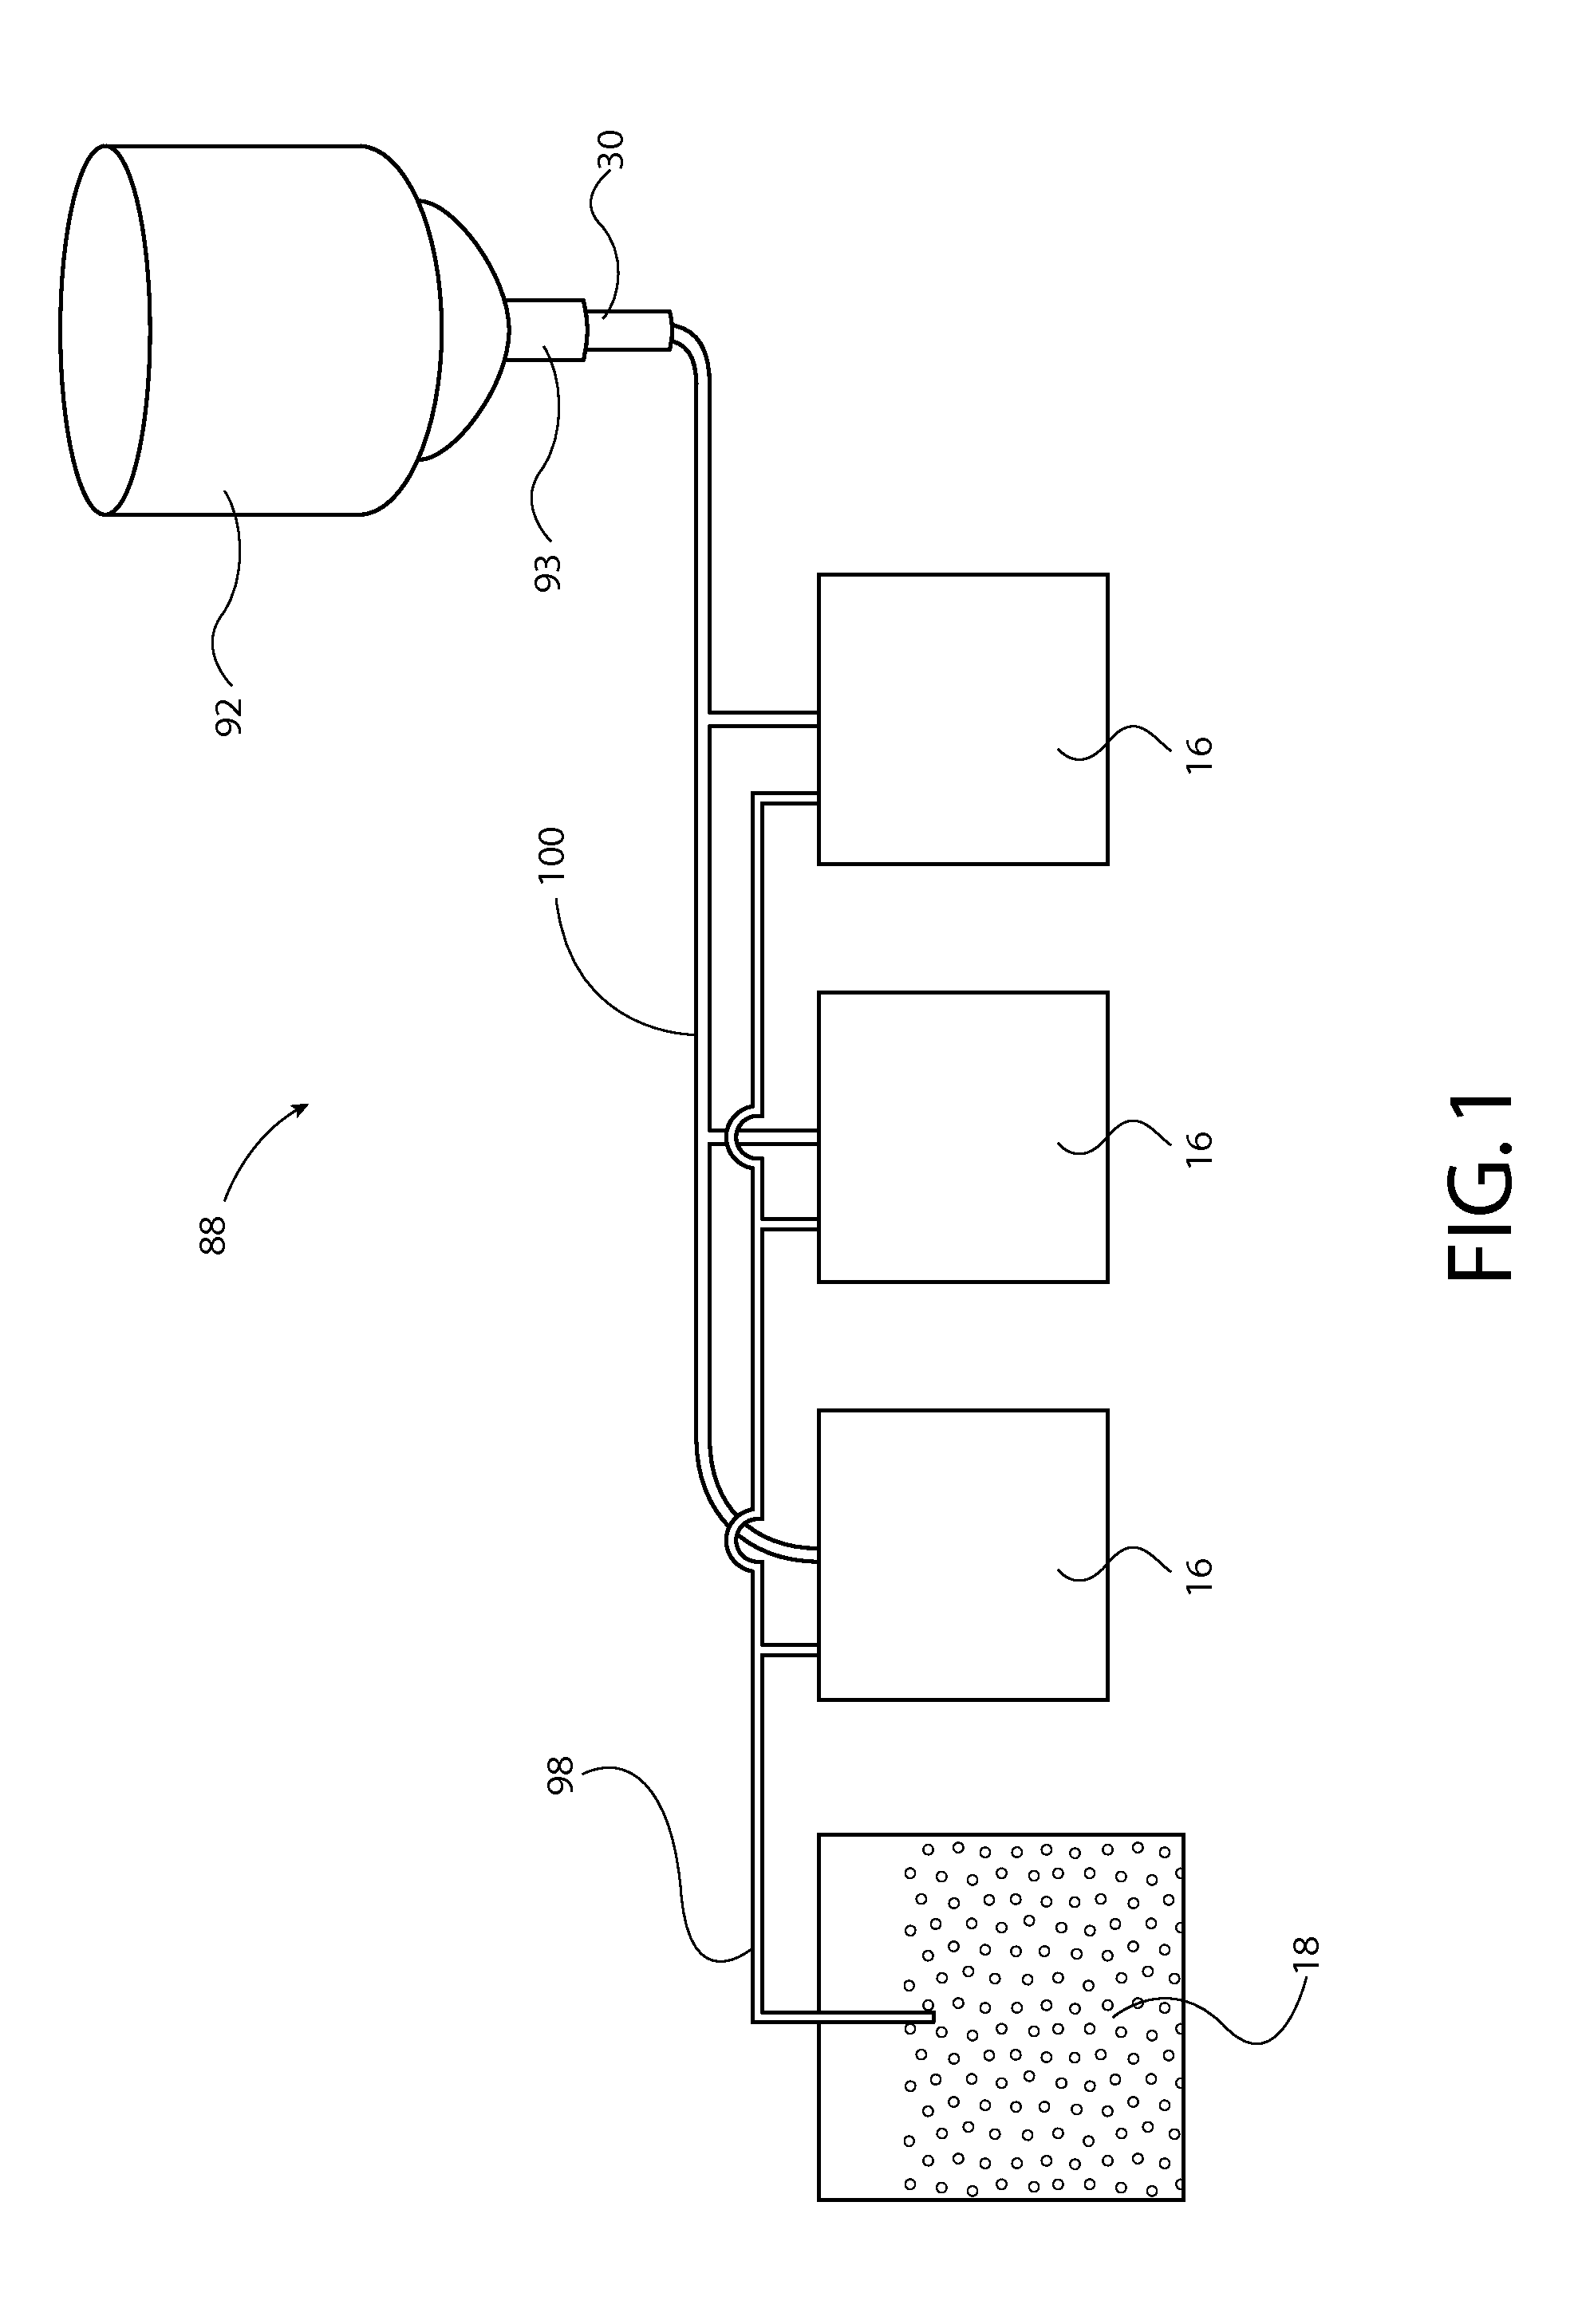 Method and apparatus for resin delivery with adjustable air flow limiter